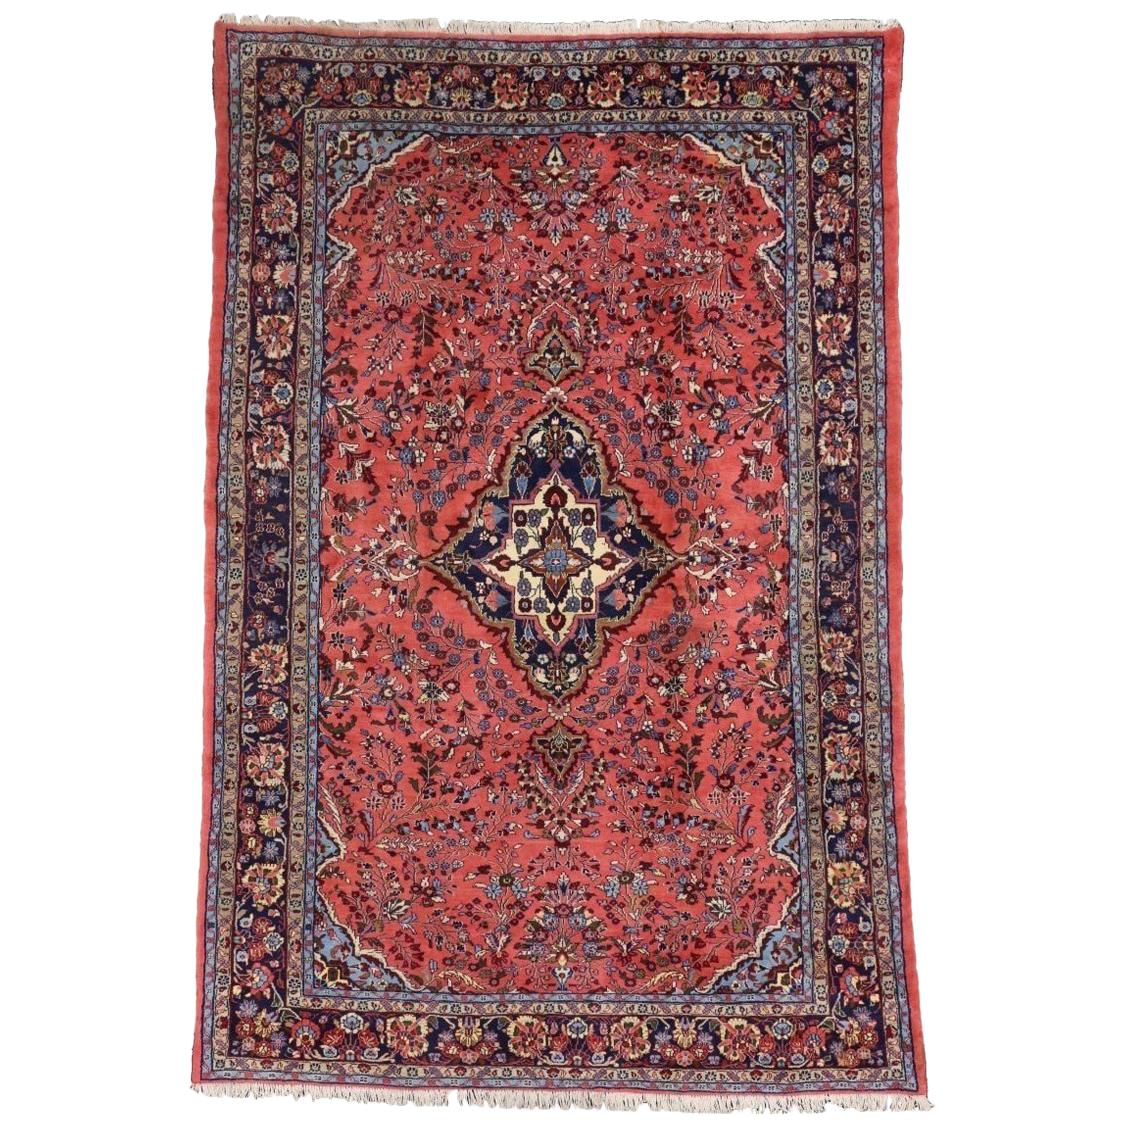 Vintage Persian Mehraban Rug with Traditional Style